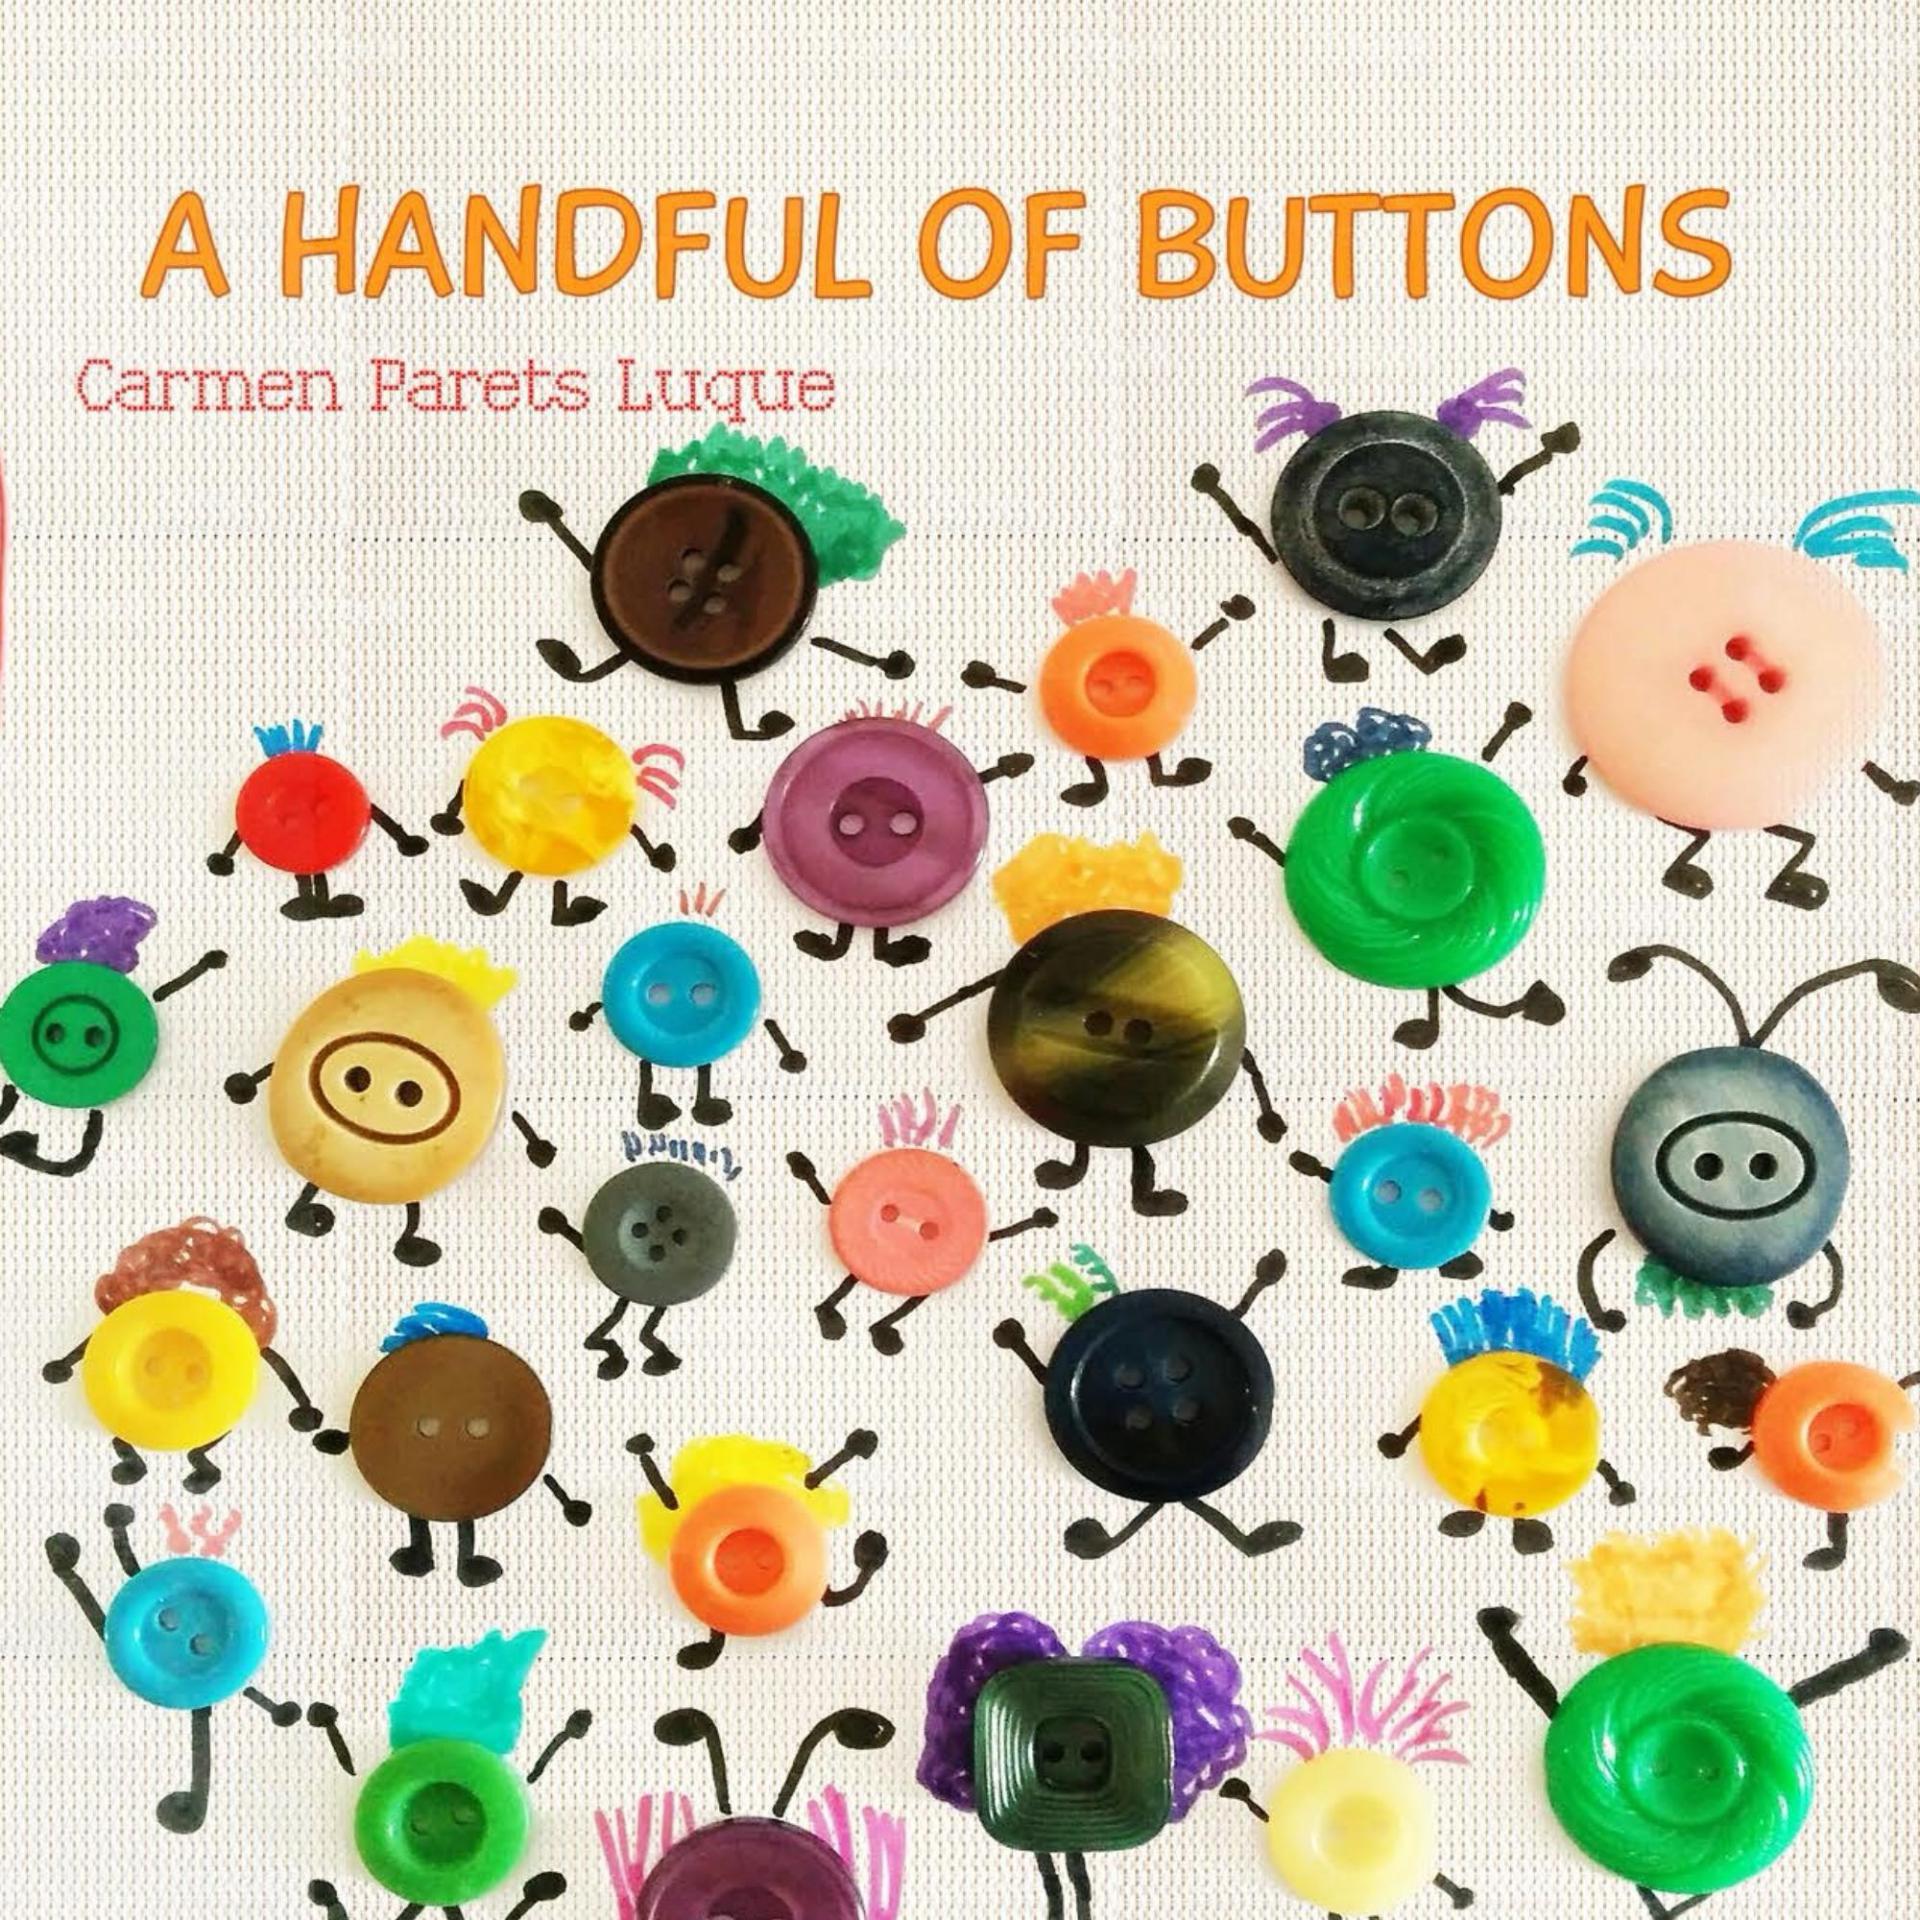 FREE: A handful of buttons by CARMEN PARETS LUQUE